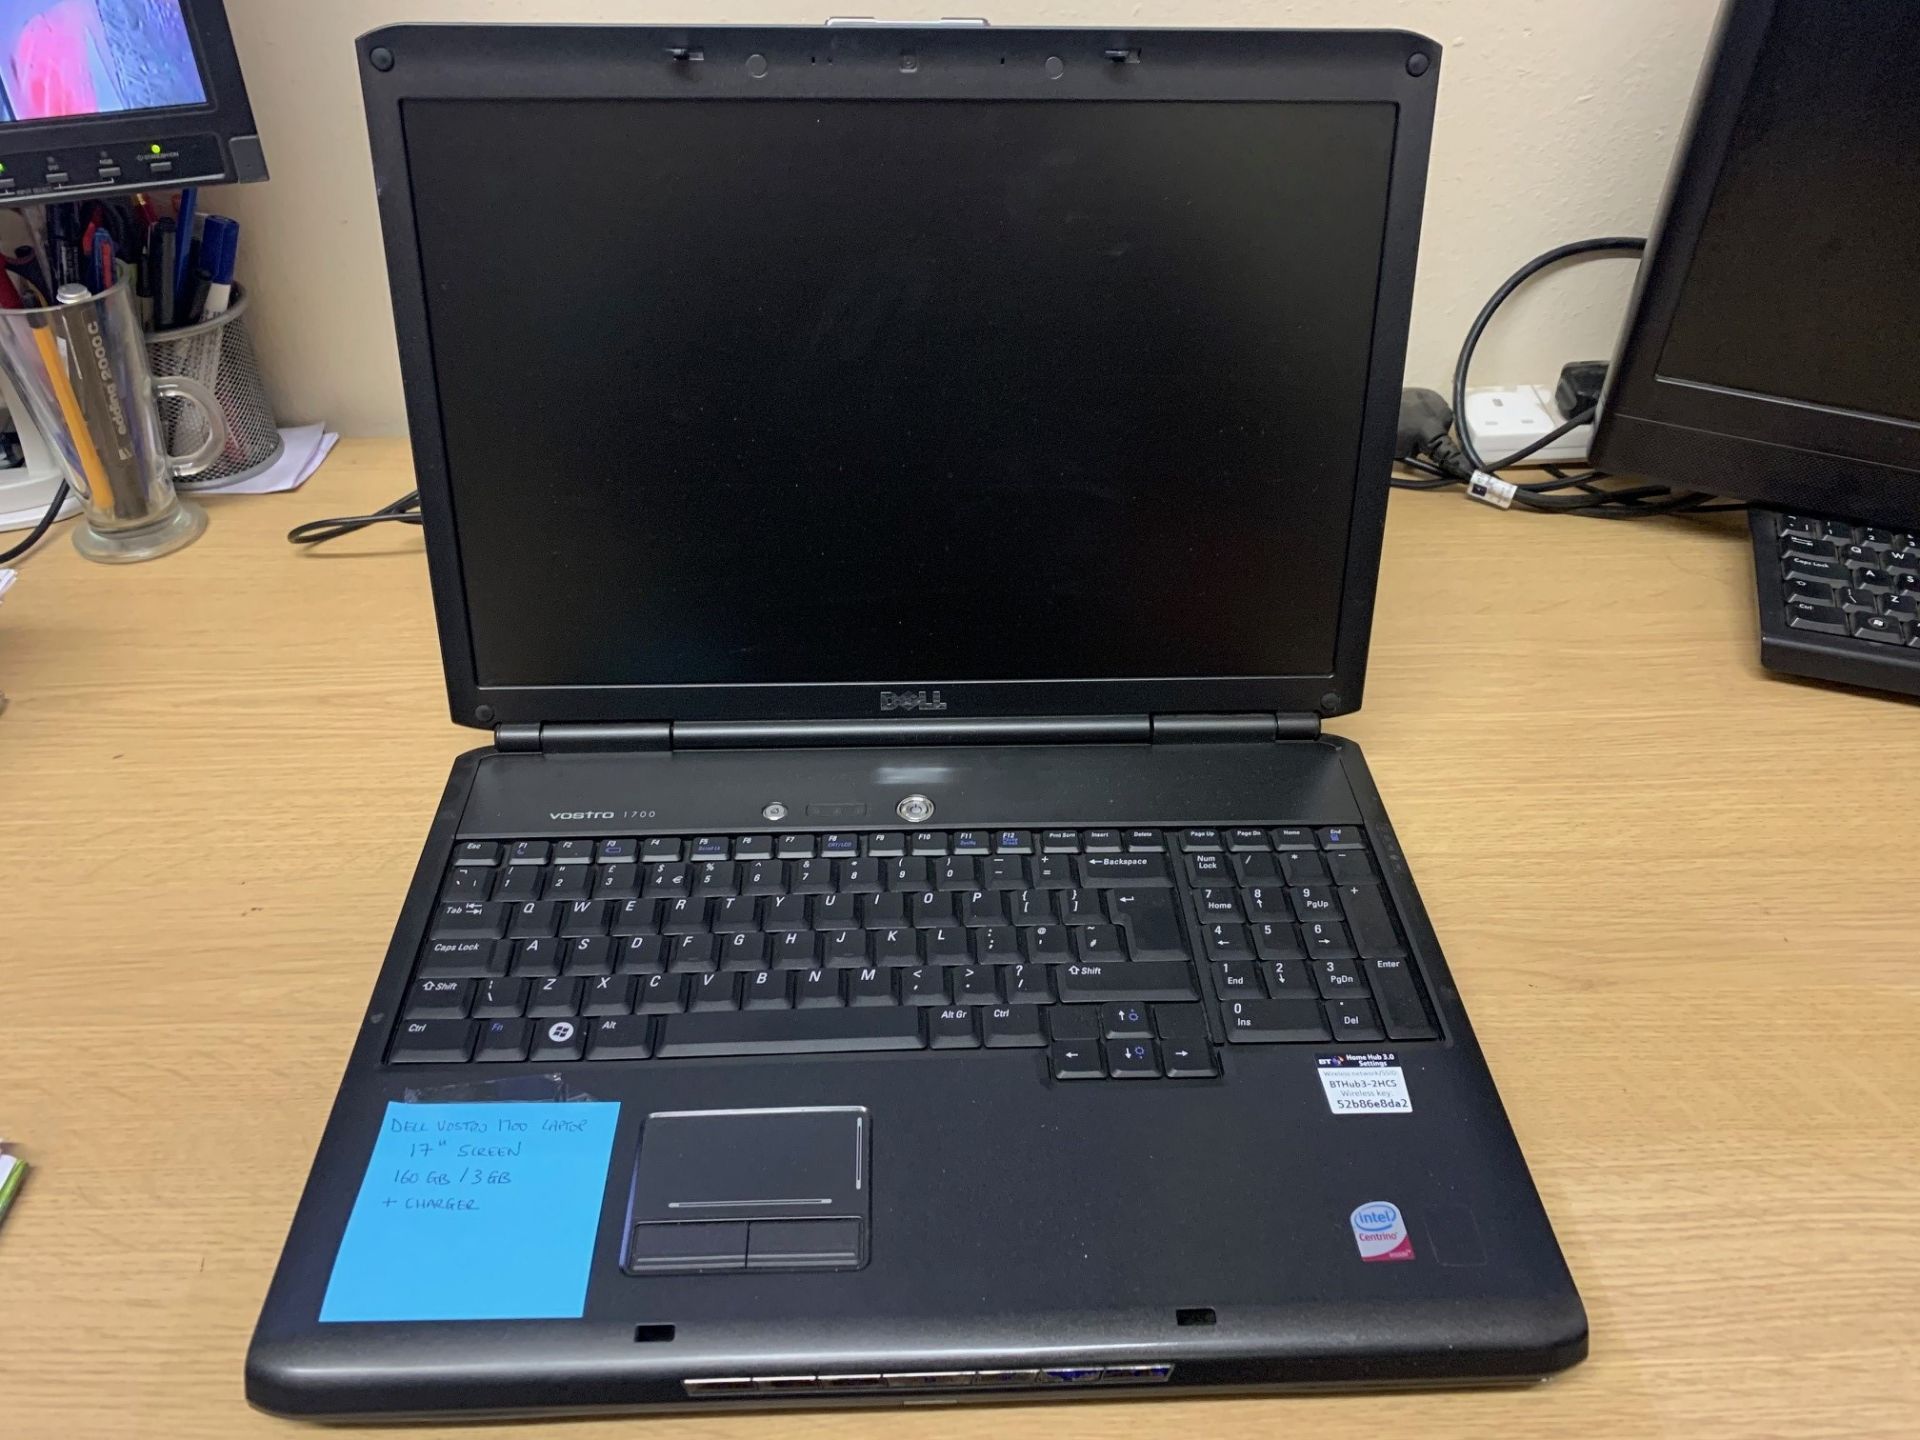 Dell Vostro 1700 Laptop - 160GB Hard Drive, 3GB RAM, 17" Screen, Windows Vista & Charger - Image 2 of 3